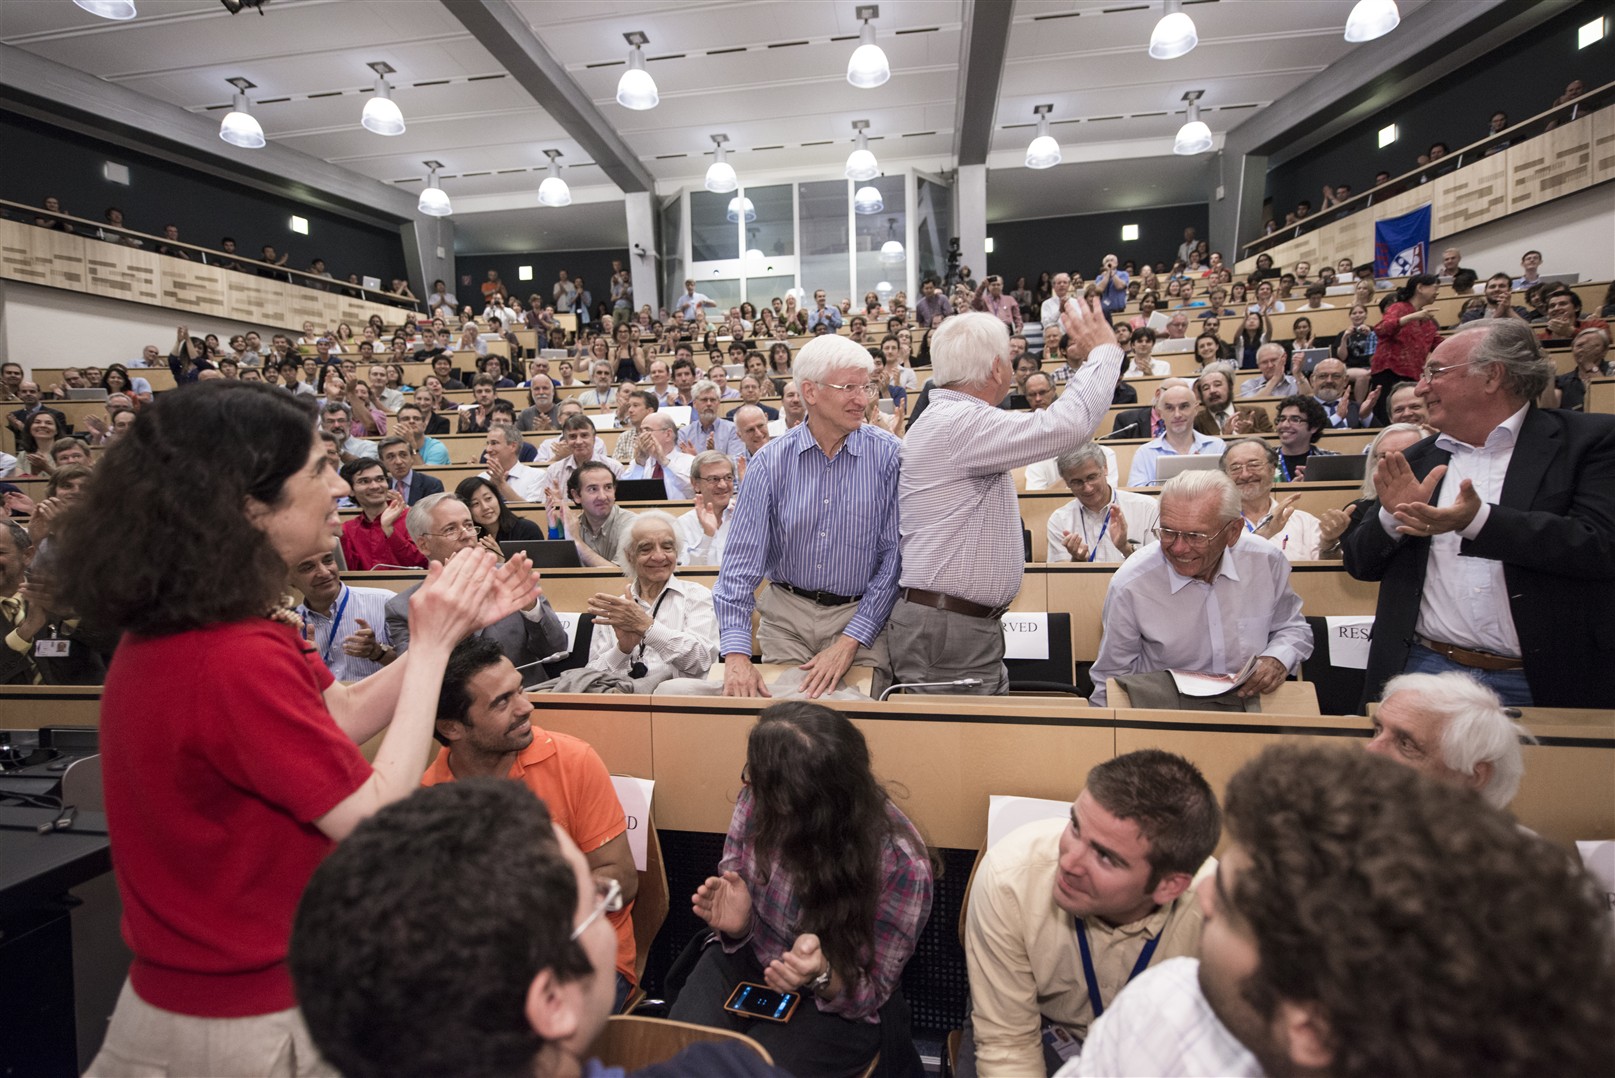 A round of applause for Fabiola Gianotti (left), ATLAS spokesperson, and Joe Incandela, CMS spokesperson, and for the LHC project leader Lyn Evans (waving), at the announcement of the discovery of the Higgs boson. 